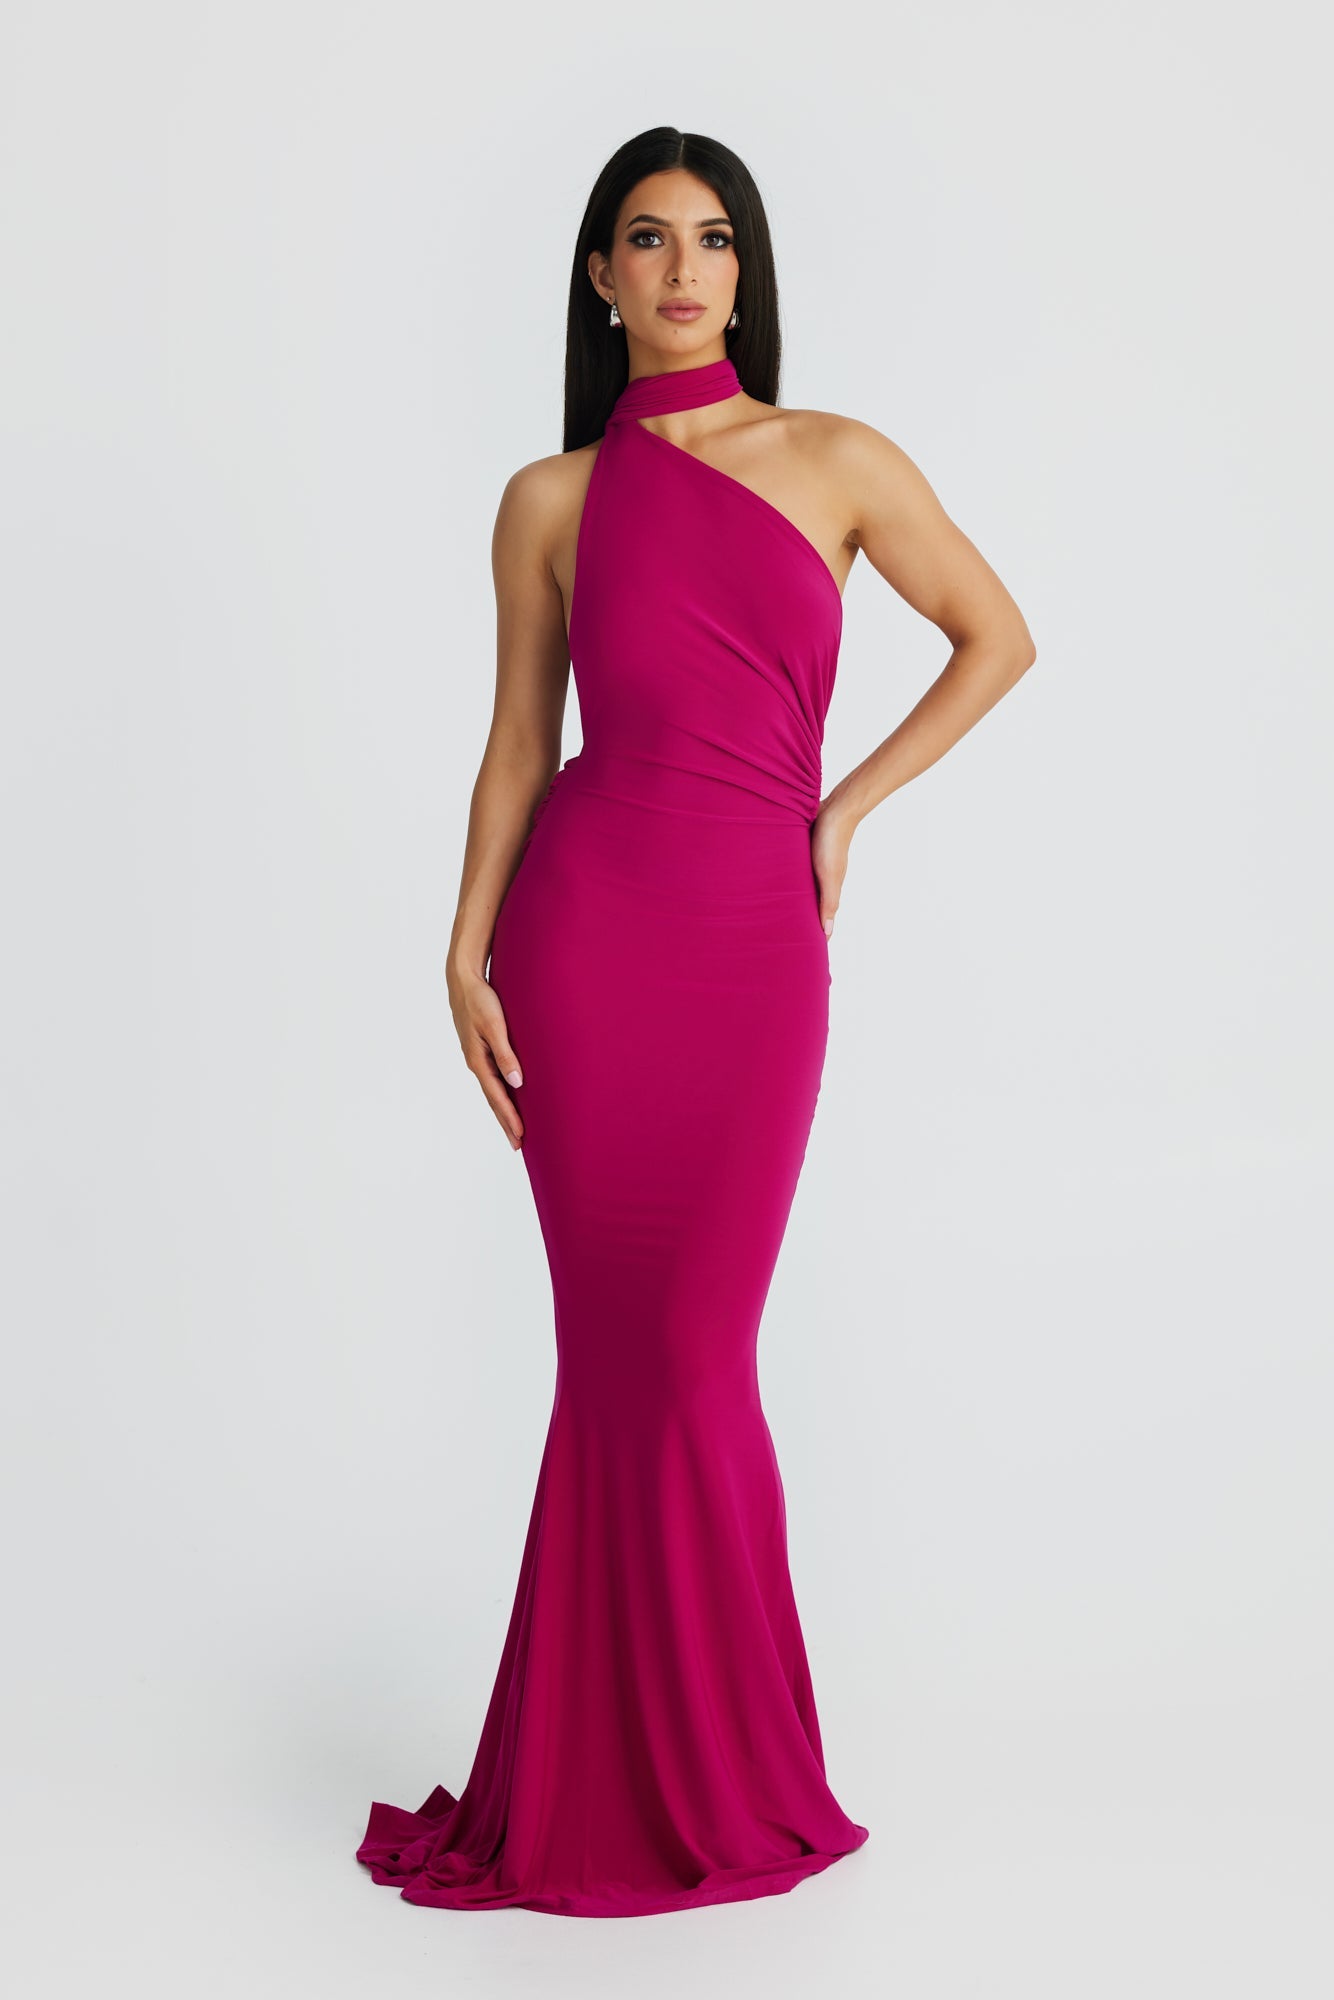 MÉLANI The Label SOFIA Deep Berry Asymmetric Backless Form Fitted Dress